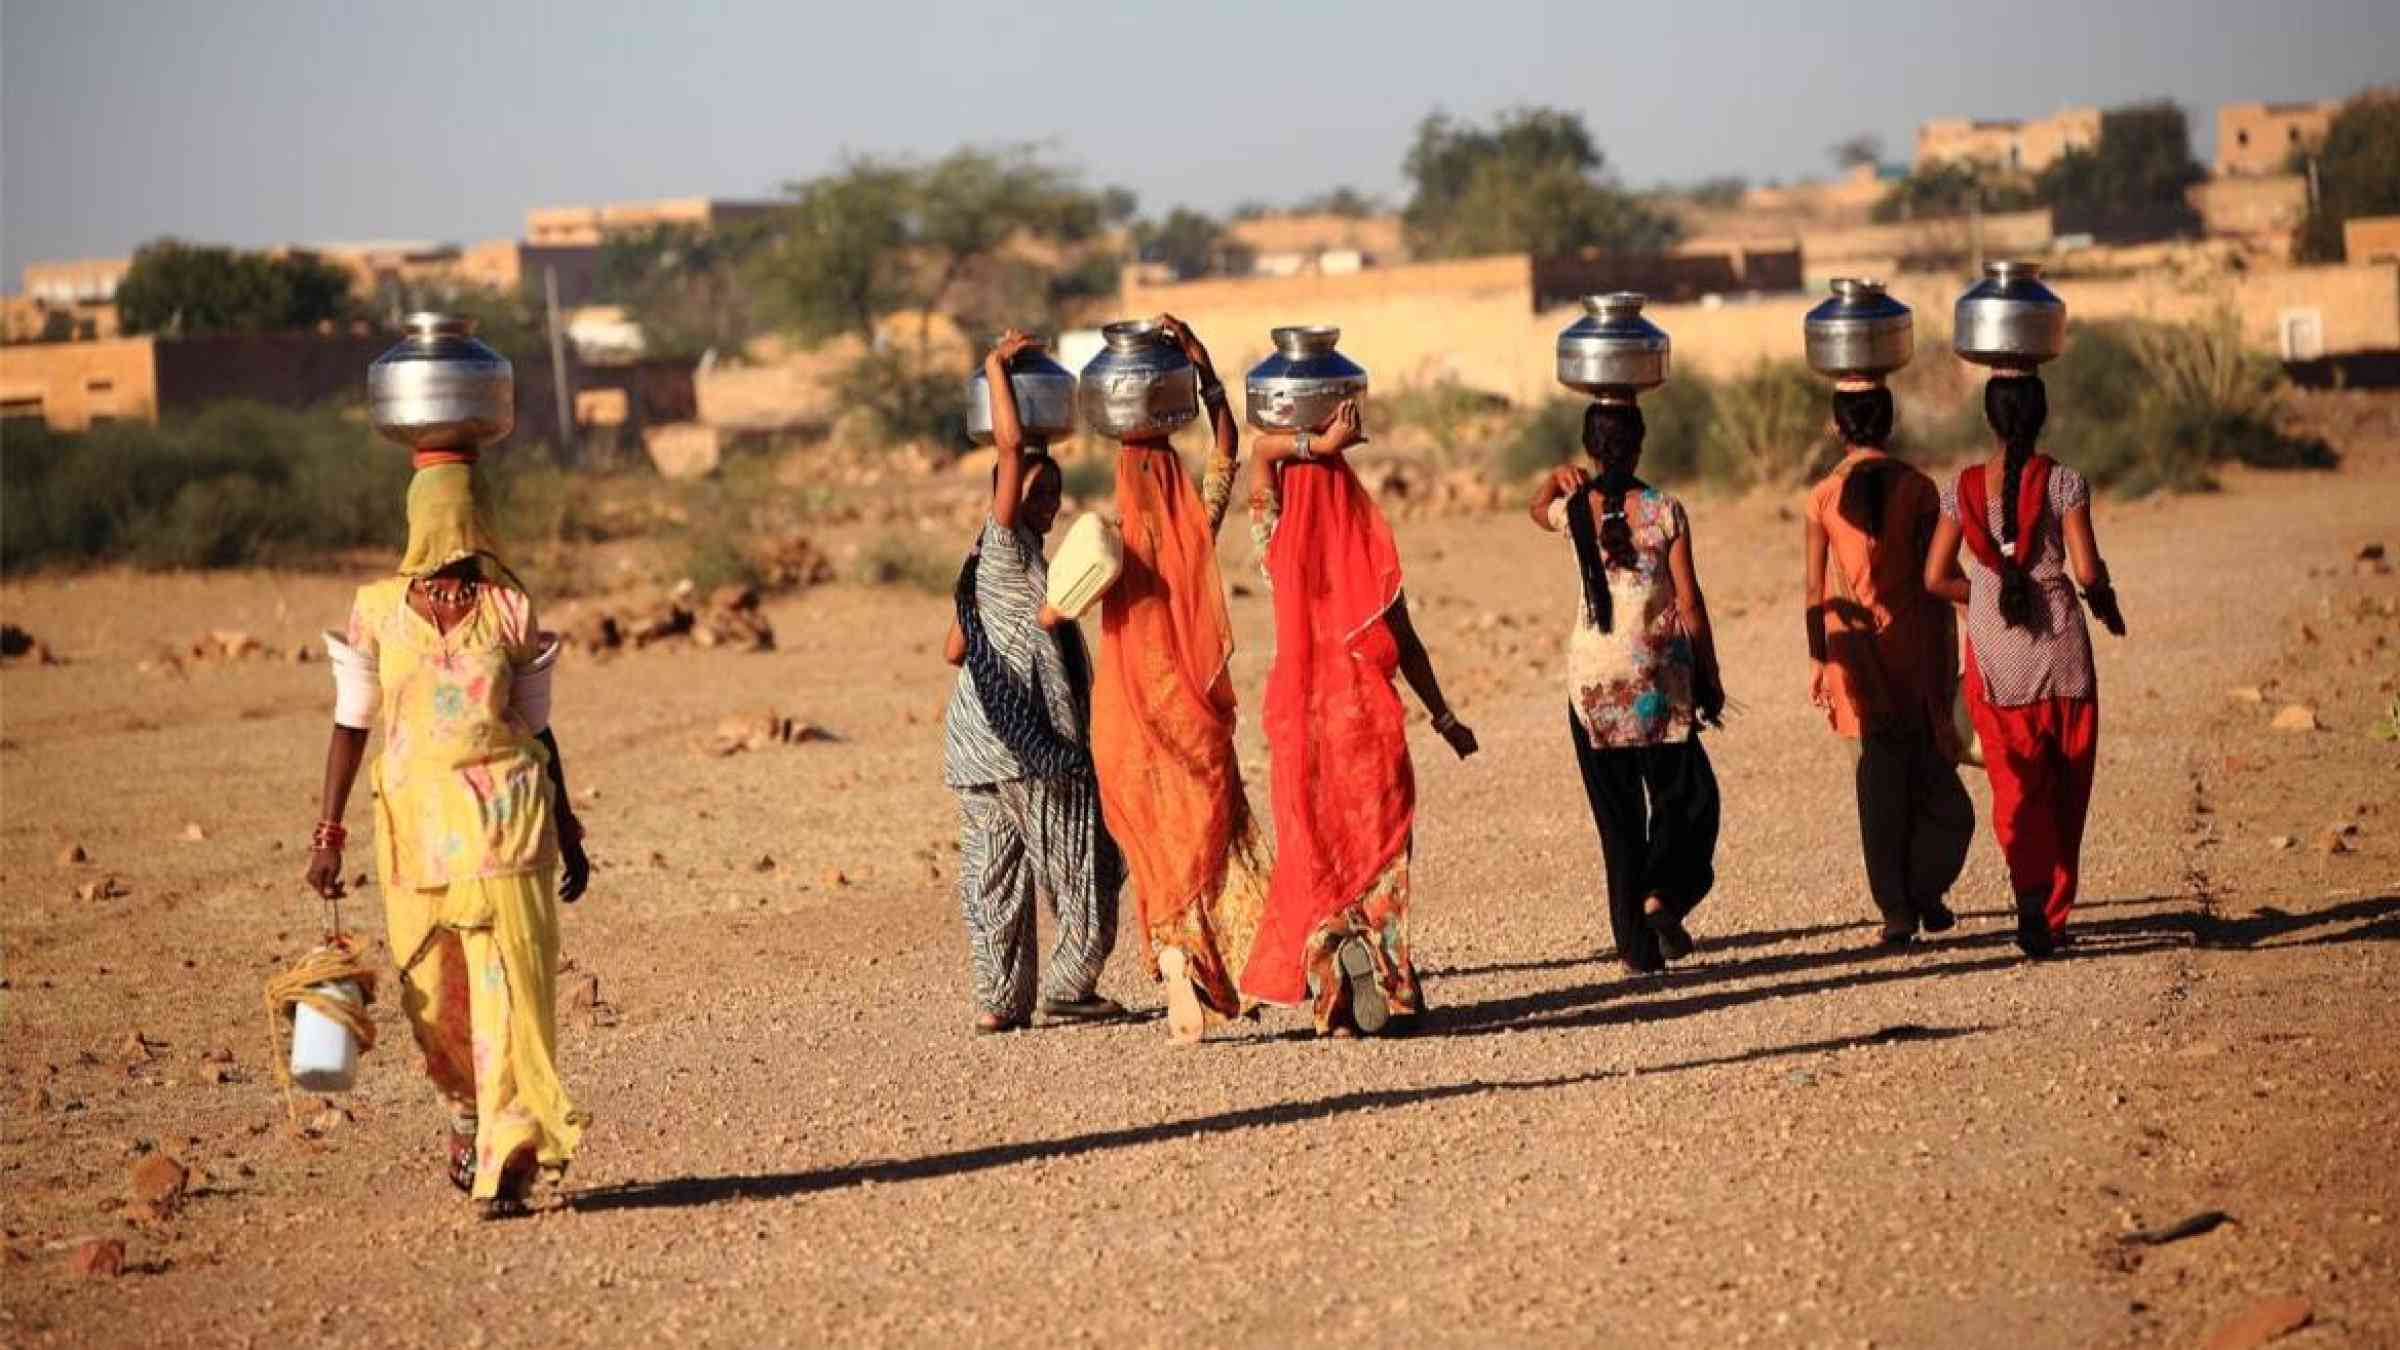 Women carrying water pots on their heads, India